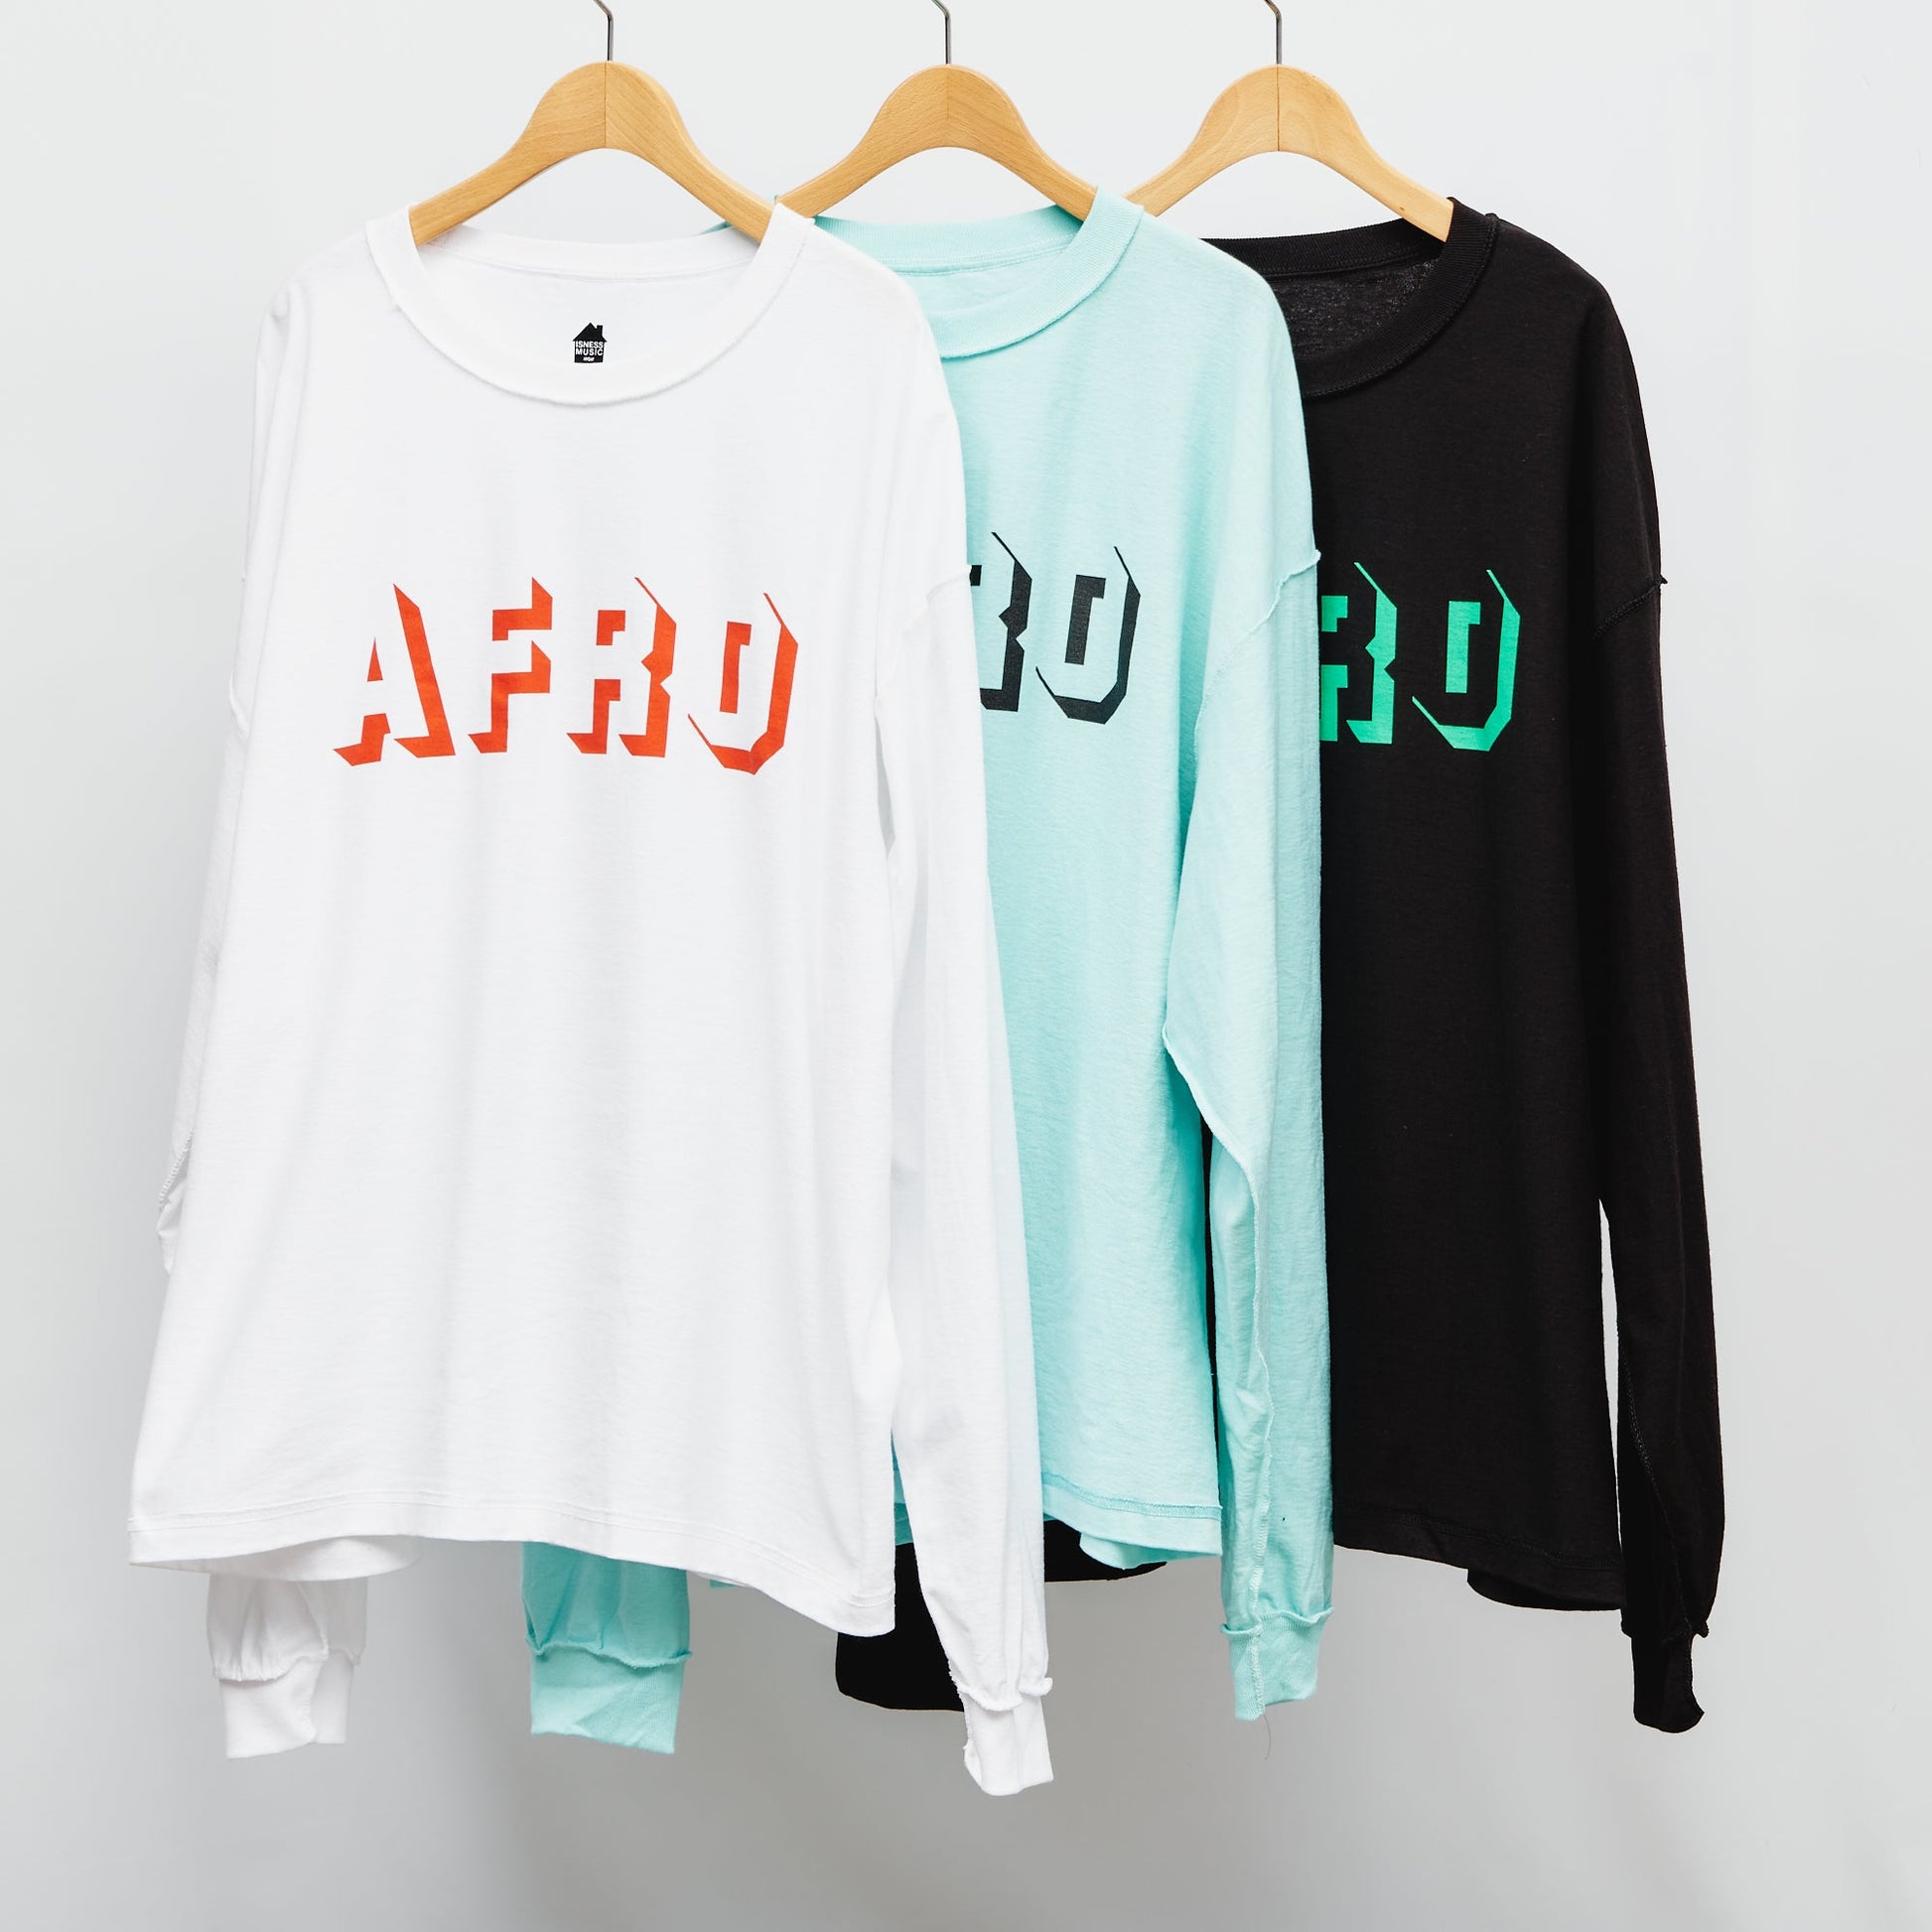  AFRO L/S T-SHIRTS is-ness online shop 1